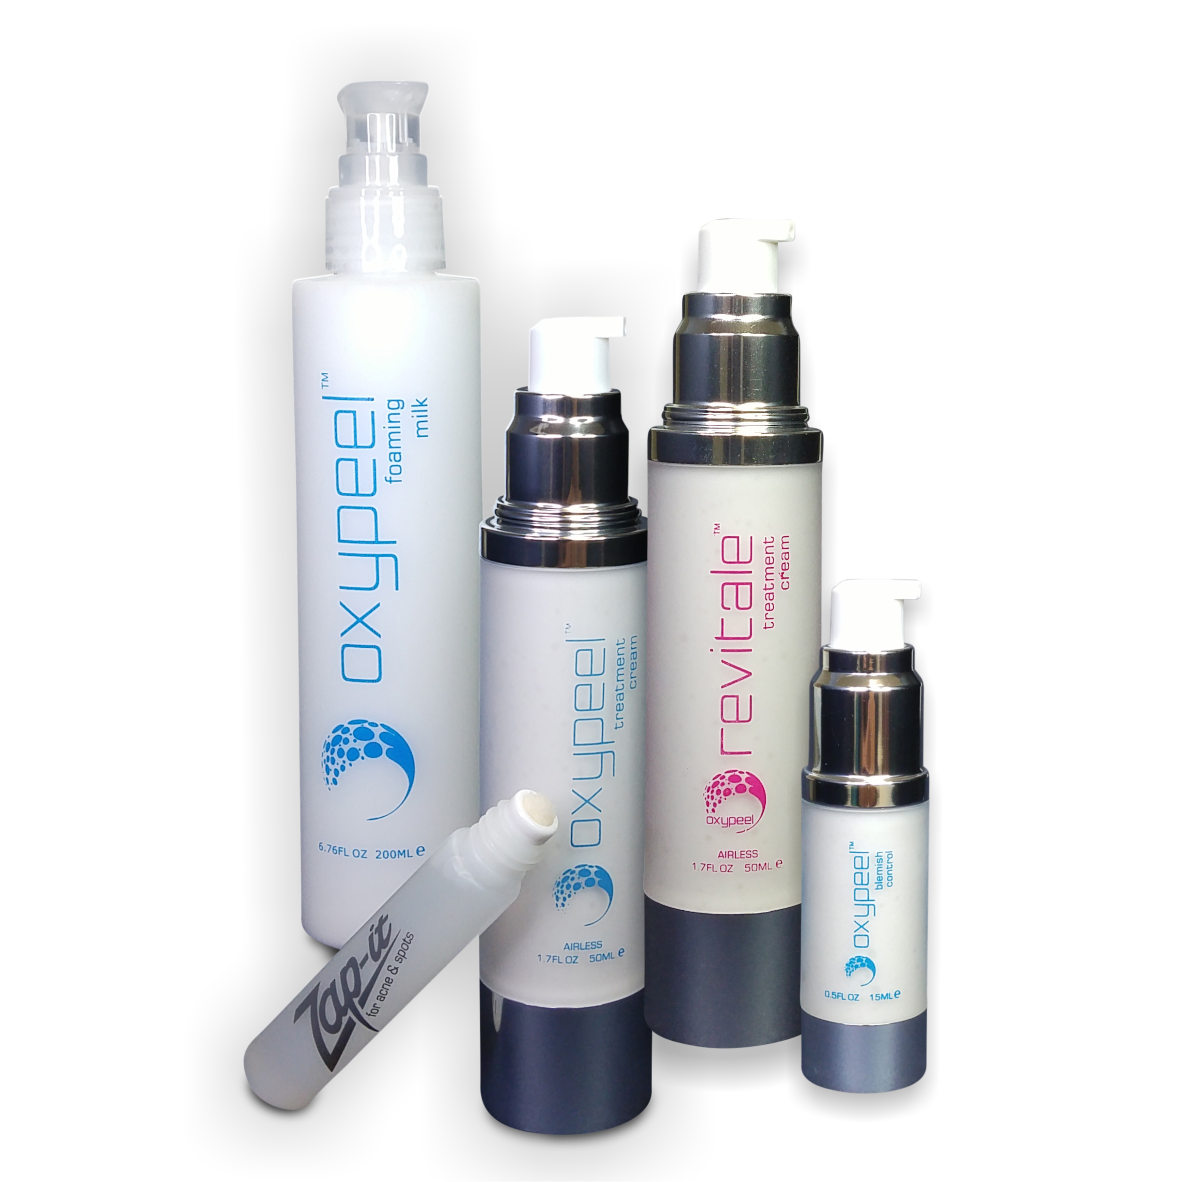 Oxypeel Homecare Products